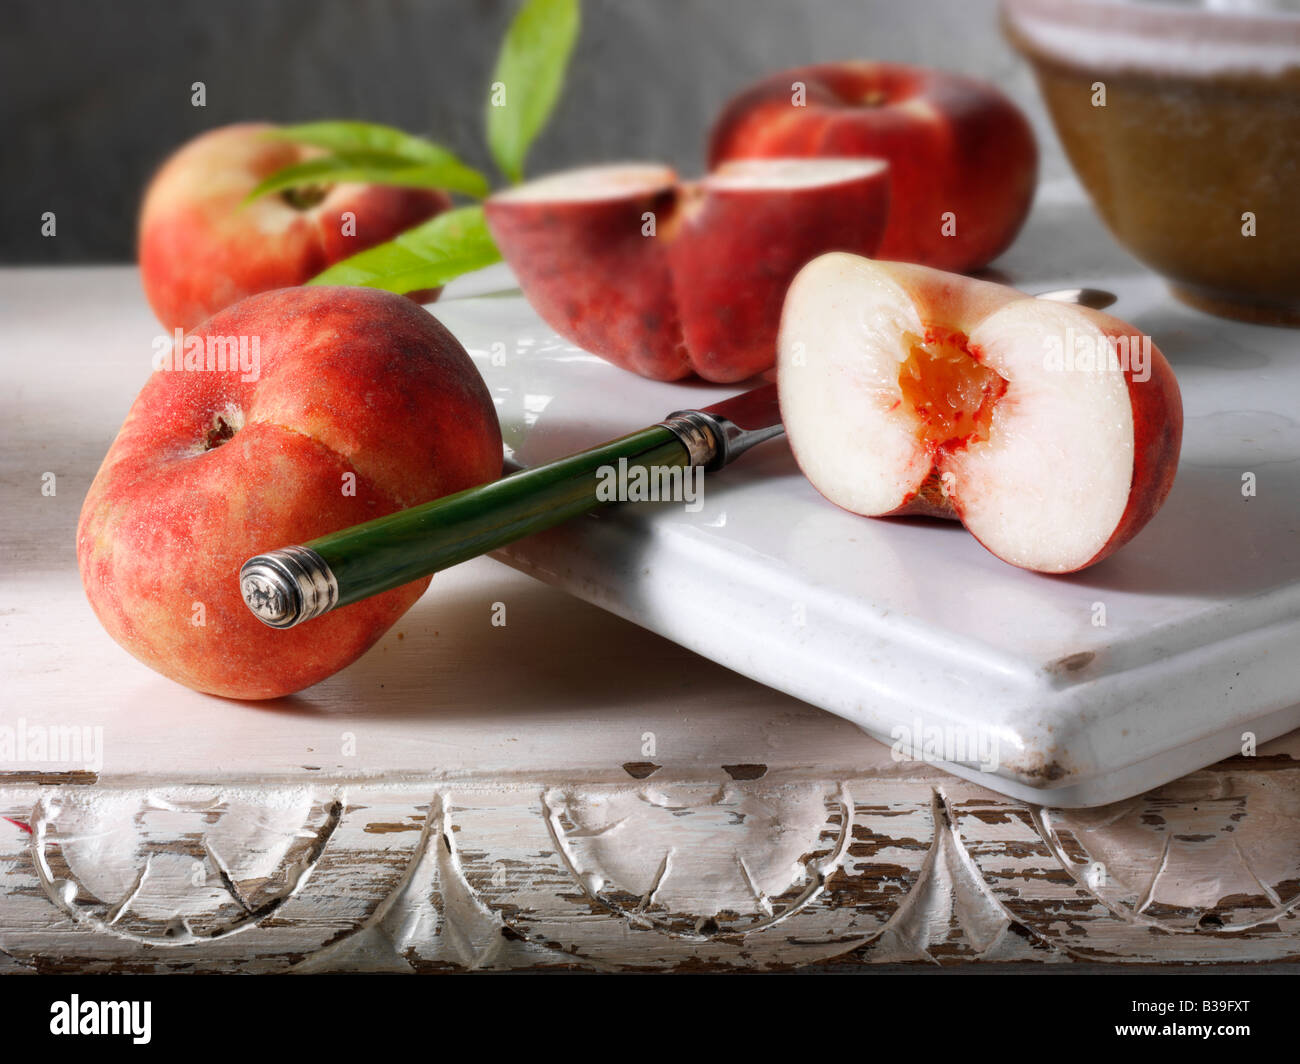 Still life of fresh donut peaches, cut and whole in a rustic kitchen setting Stock Photo